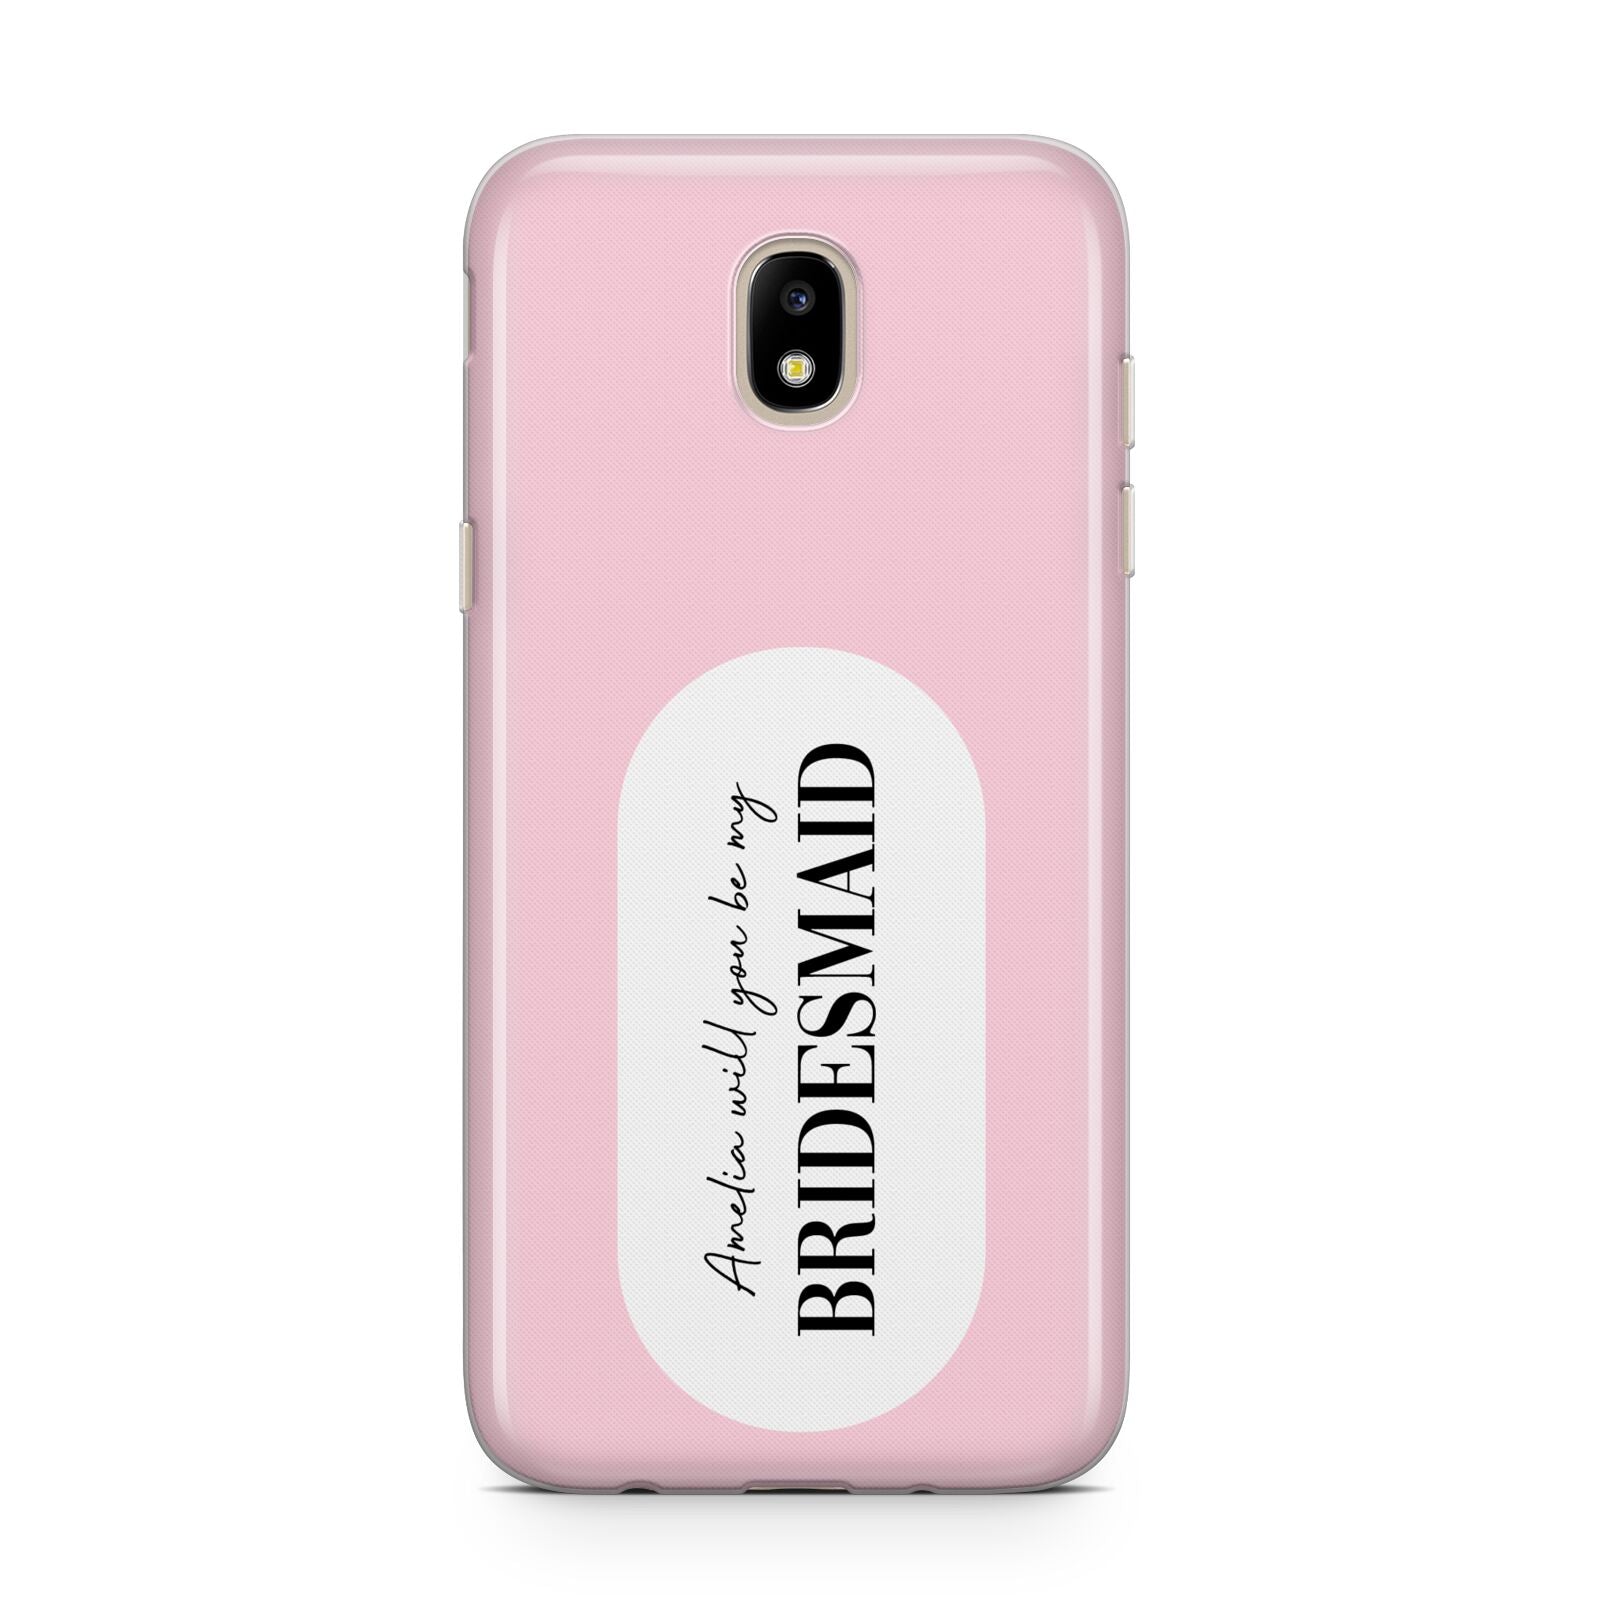 Will You Be My Bridesmaid Samsung J5 2017 Case